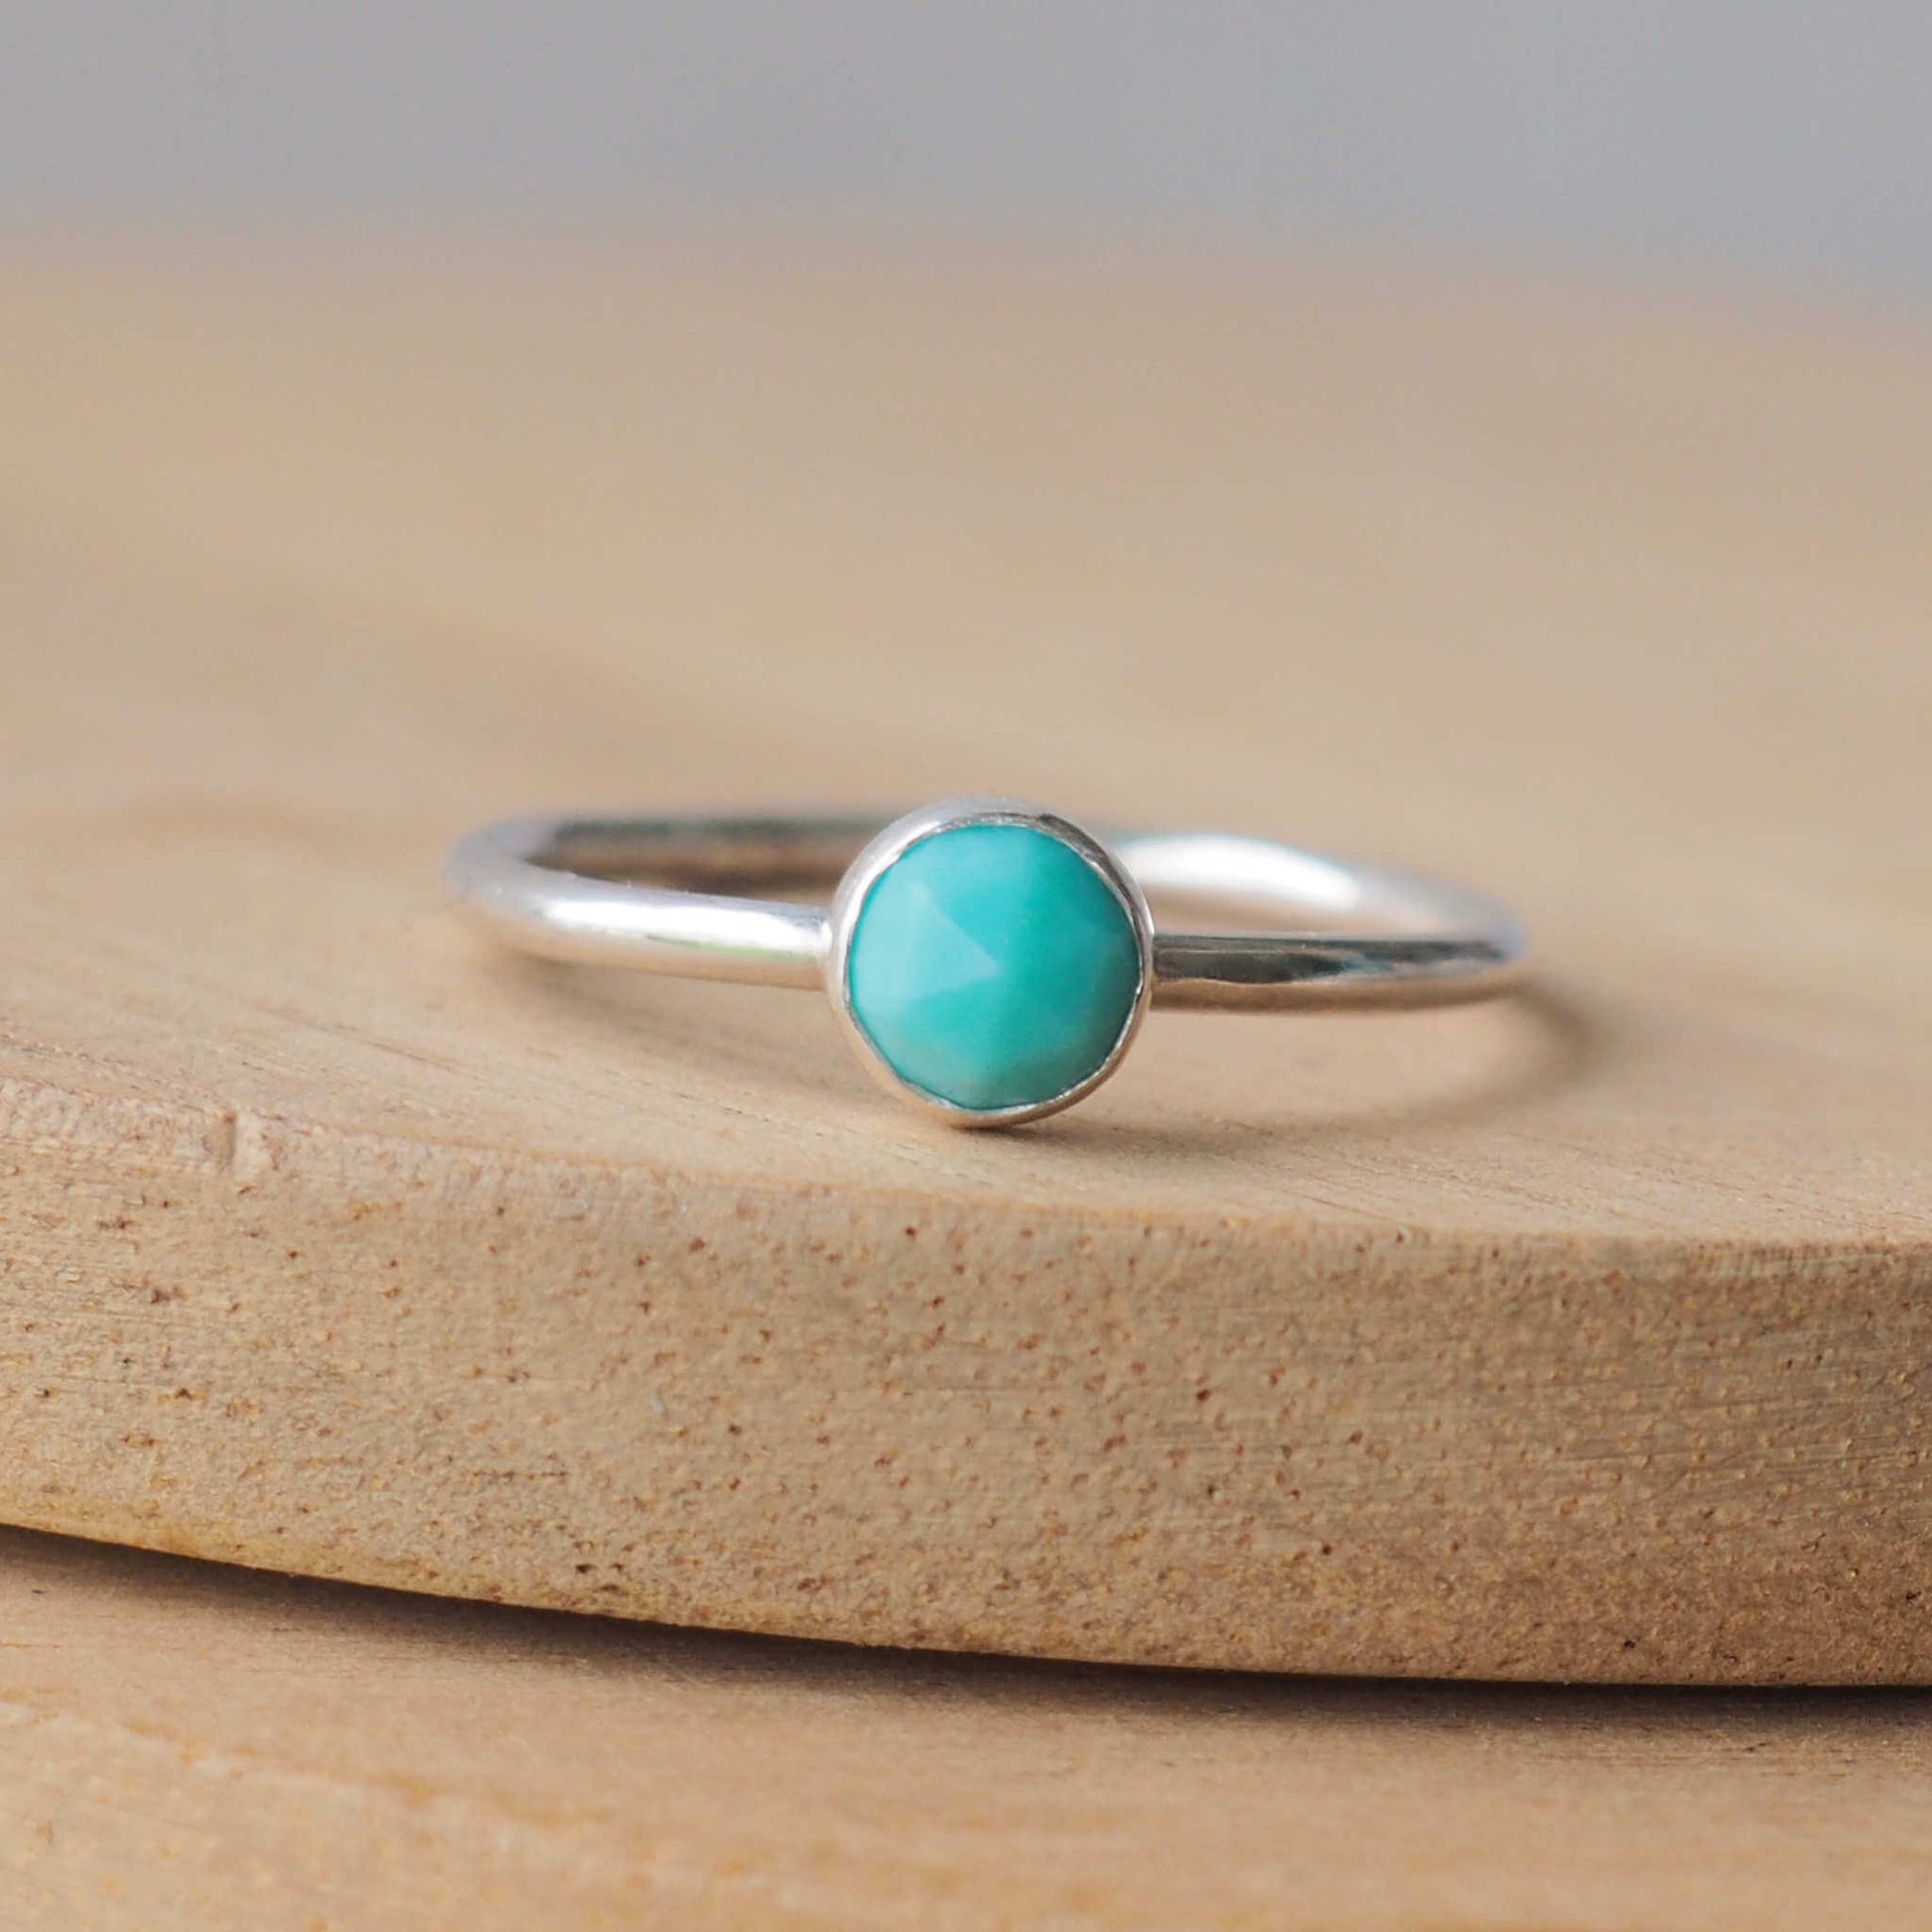 Turquoise and Sterling Silver Ring made from a small 5mm round turquoise gemstone set simply onto a modern band of round wire. Handmade to your ring size by maram jewellery in Scotland